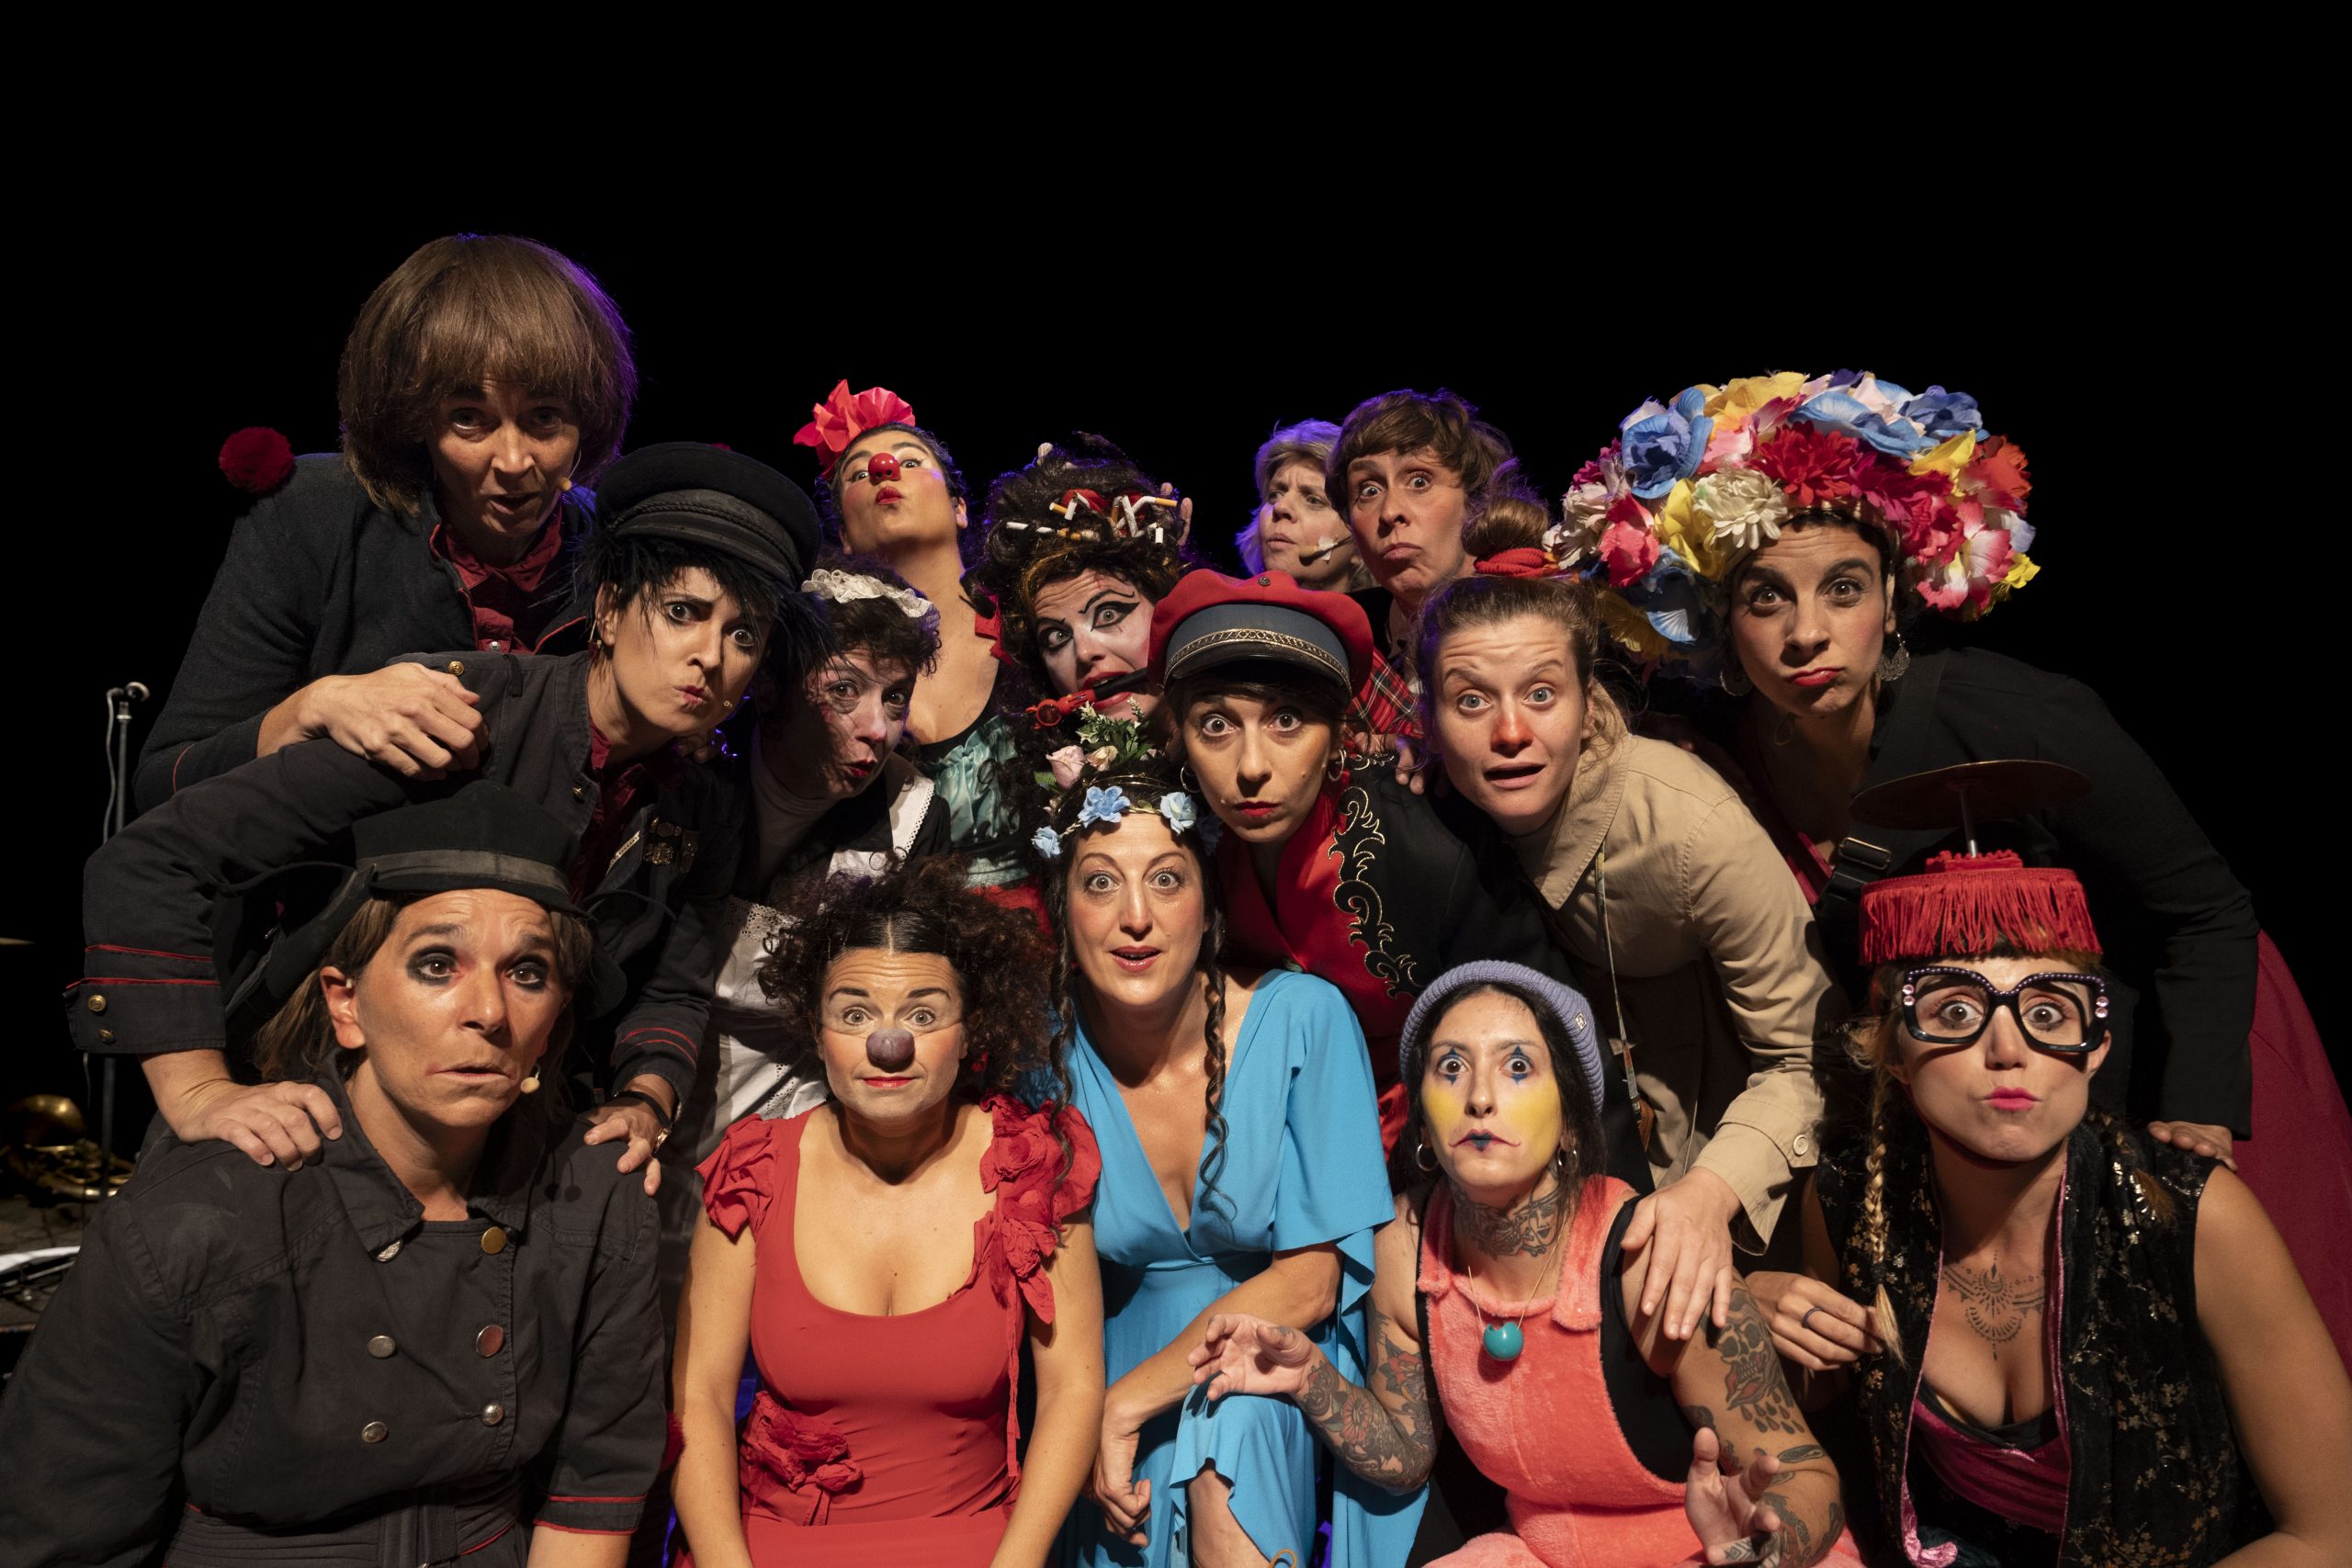 Circo.it – Site do National Circus Monthly » Comediantes Guerreiros Selvagens: Festival Pagliacci